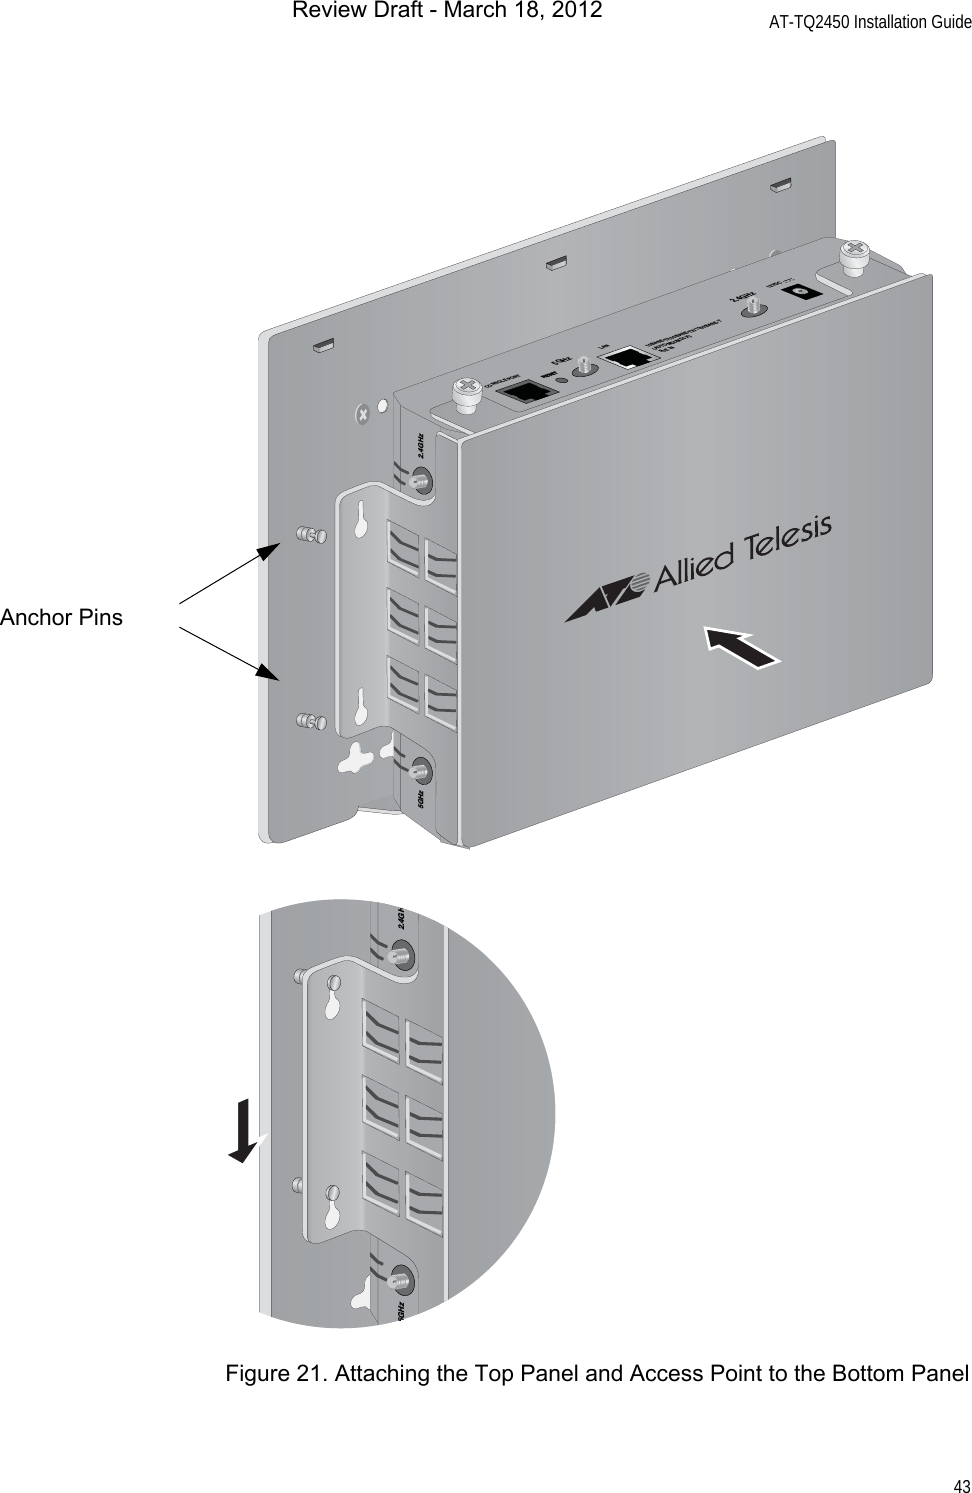 AT-TQ2450 Installation Guide43Figure 21. Attaching the Top Panel and Access Point to the Bottom PanelCONSOLE PORTRESET5GHzRESET2.4GHzLAN10BASE-T/100BASE-TX/1000BASE-T(AUTO MDI/MDI-X)PoE IN12VDC5GHz 2.4GHzAnchor Pins5GHz 2.4GHzReview Draft - March 18, 2012